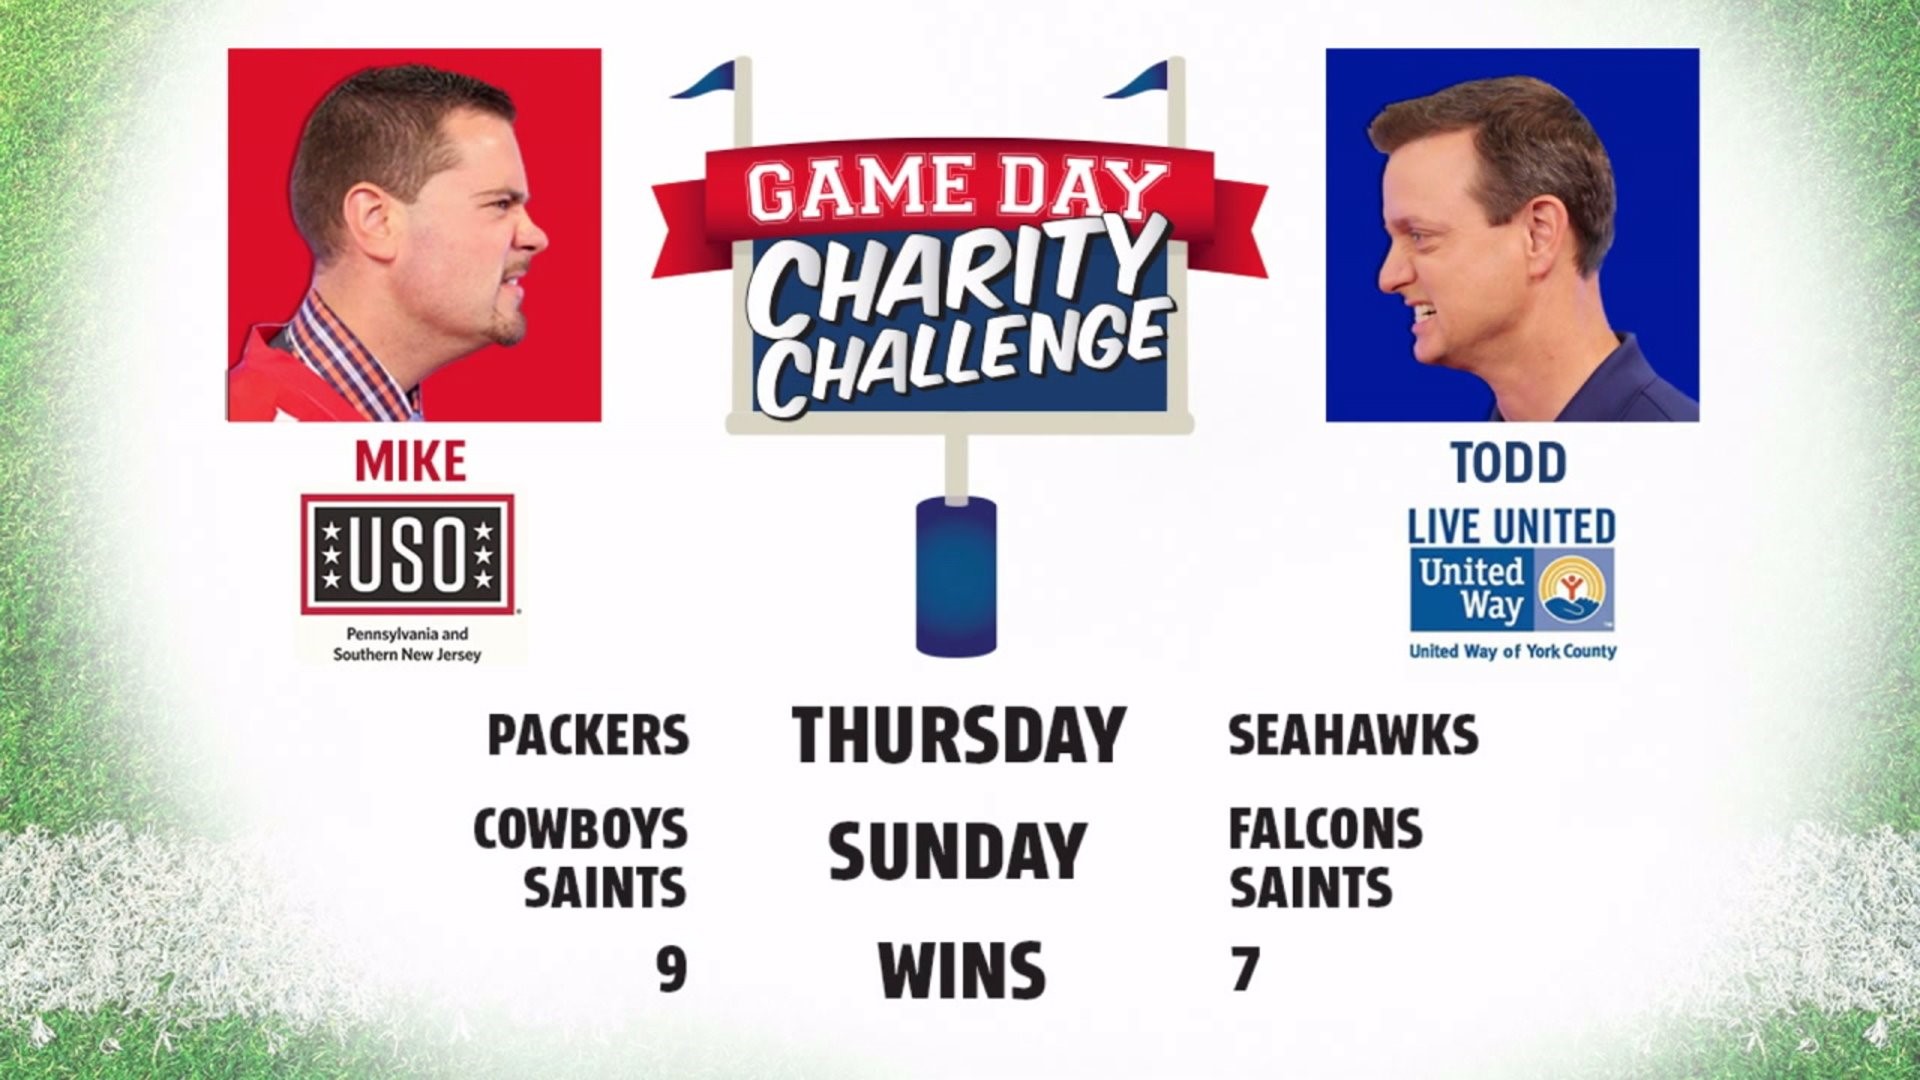 game day charity challenge (week 8)